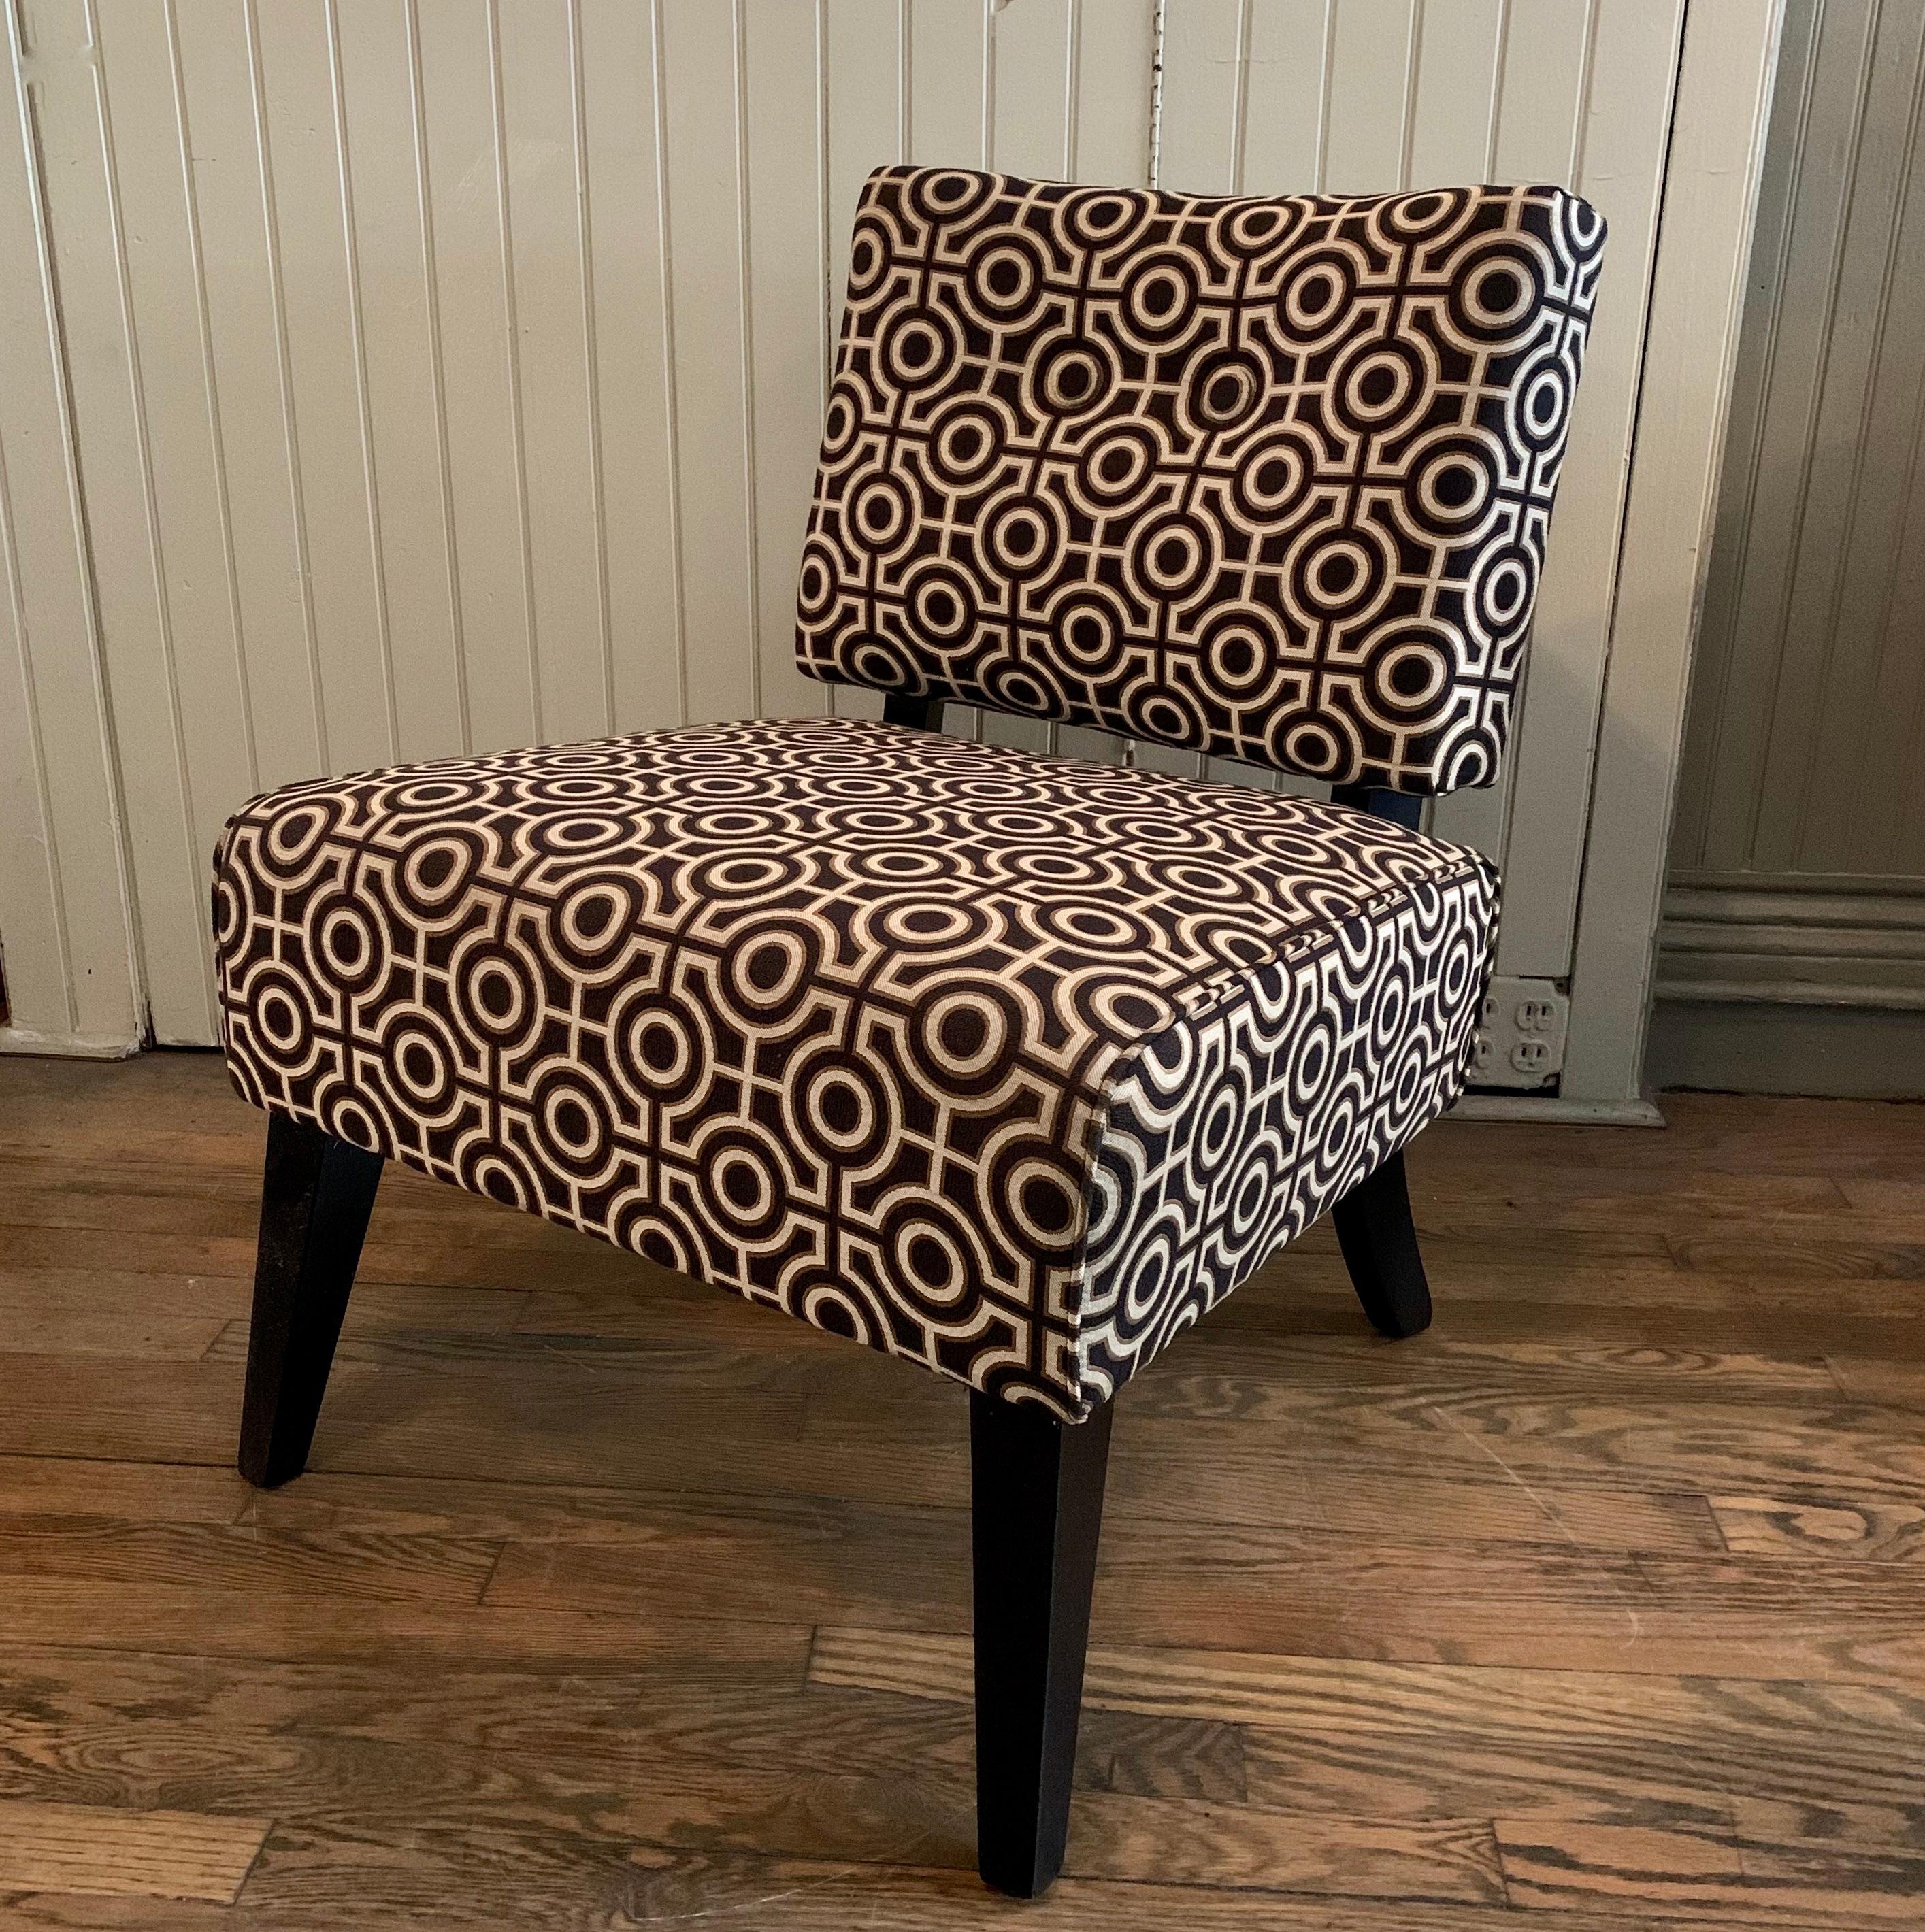 Custom, Hollywood Regency style, accent, slipper chair made by city Foundry in Brooklyn, NY features bold cotton or linen blend upholstery with a lacquered maple frame.